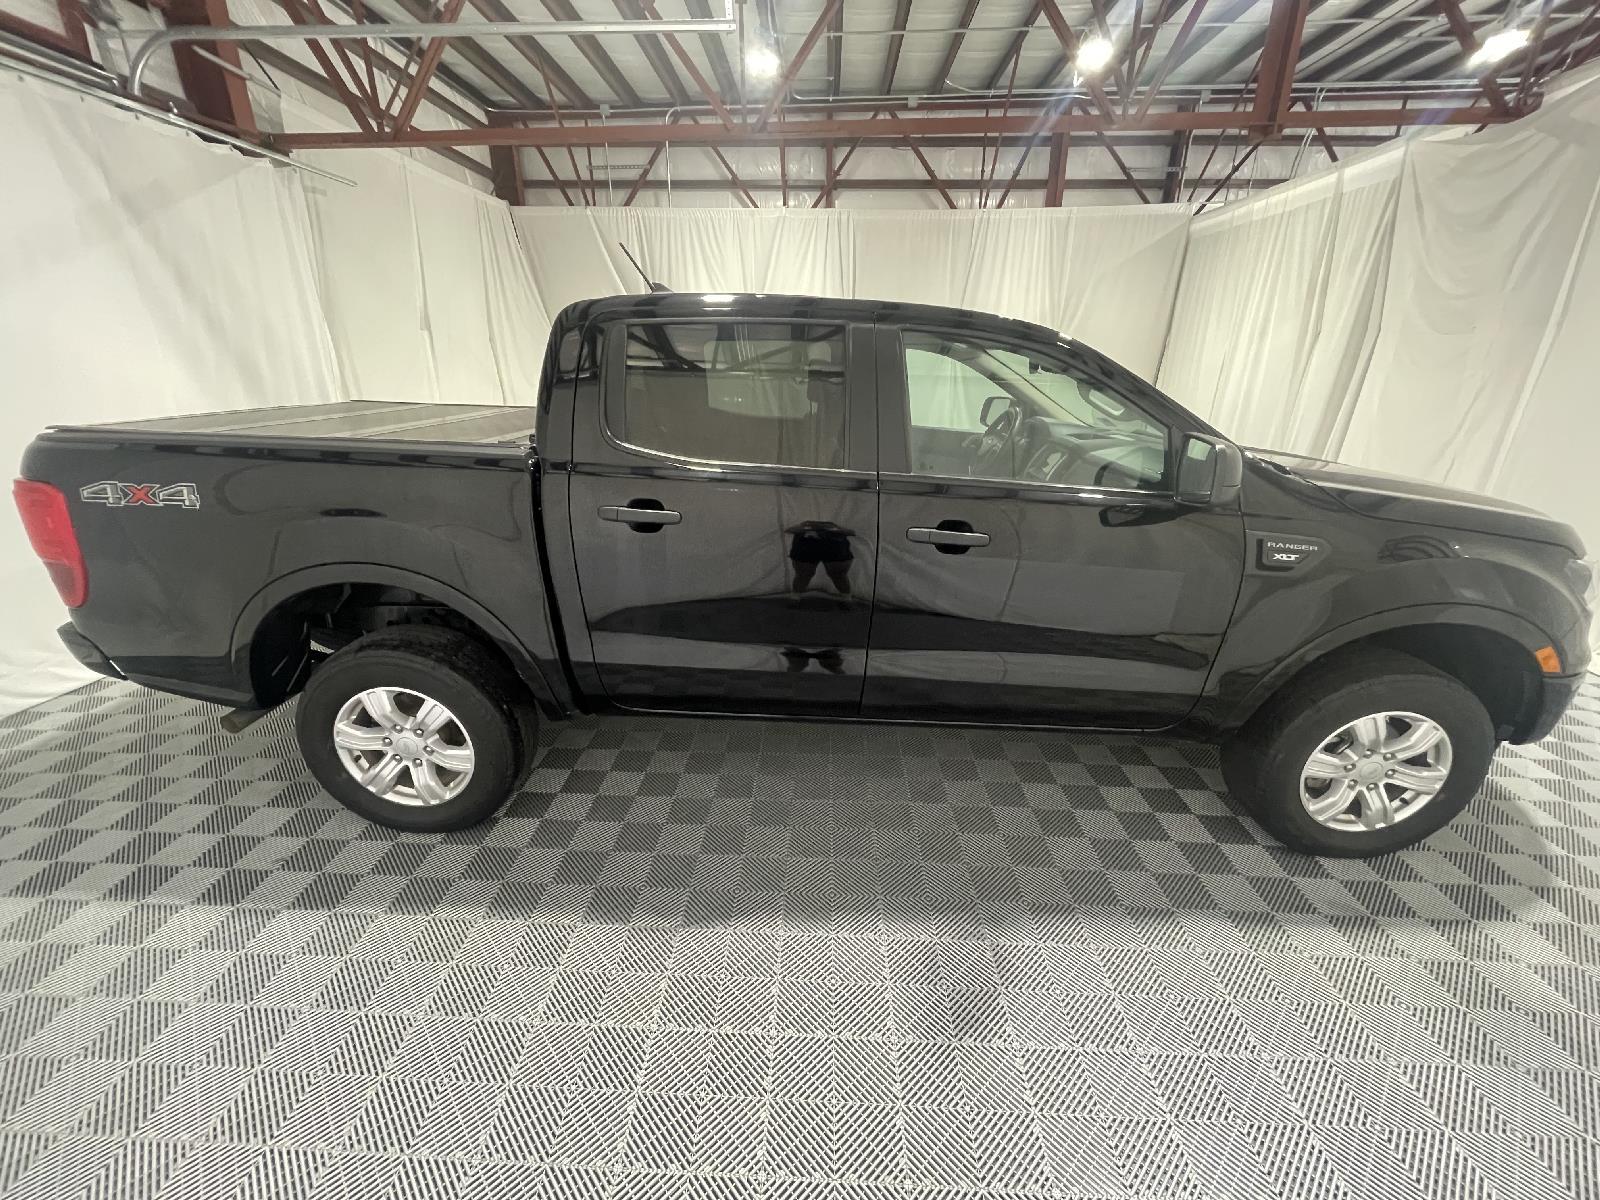 Used 2021 Ford Ranger XLT Crew Cab Truck for sale in St Joseph MO